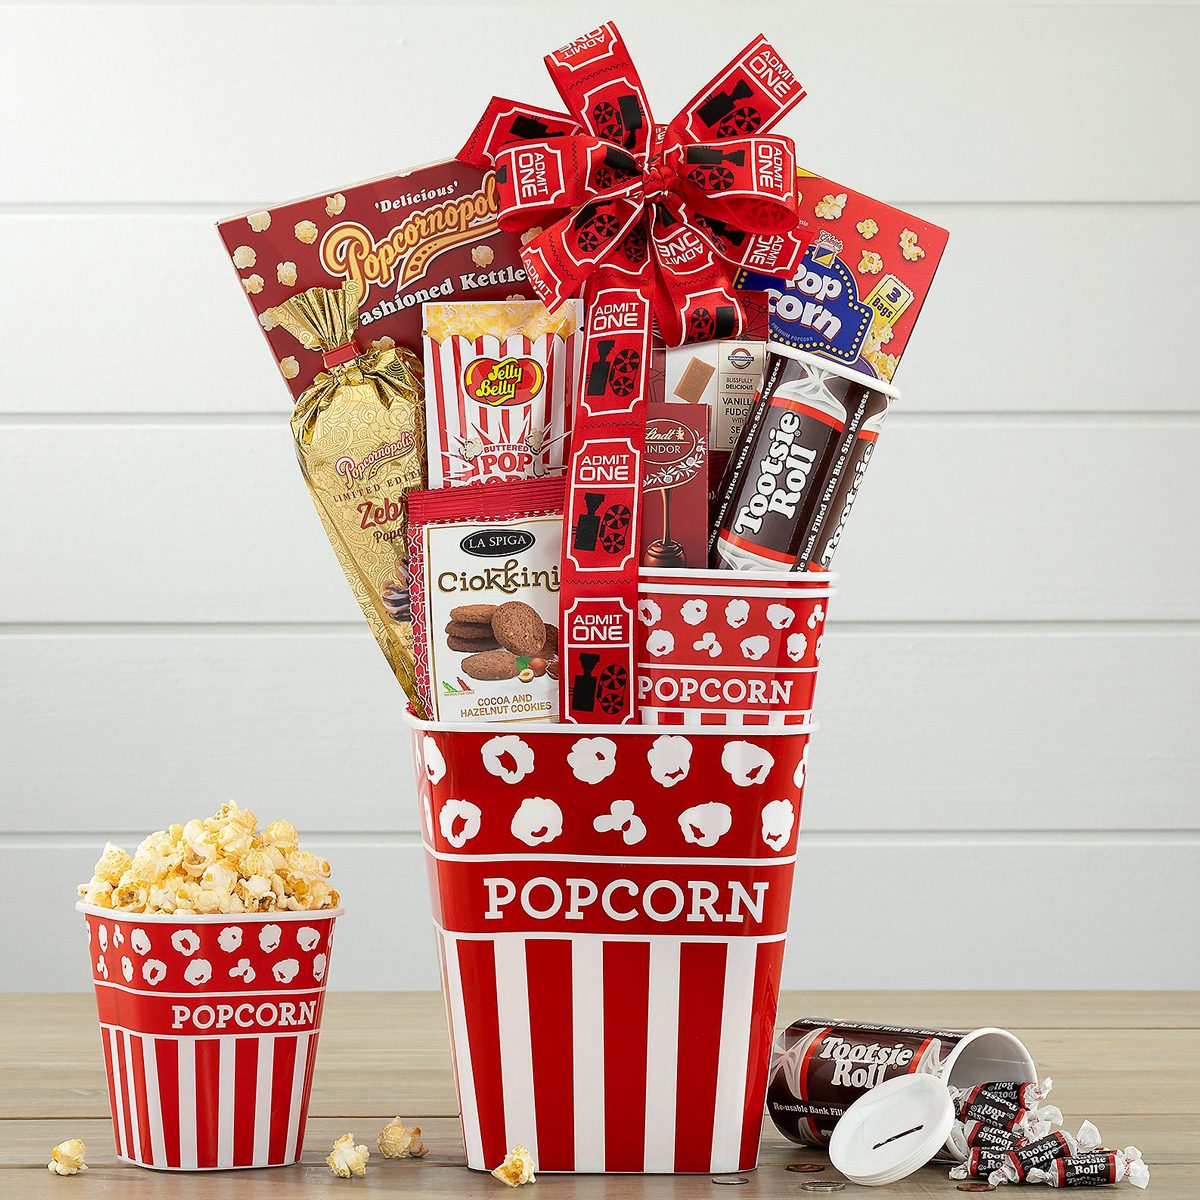 Family Movie Night Popcorn And Sweets Gift Basket By Wine Country Gift Baskets Ecomm Walmart.com